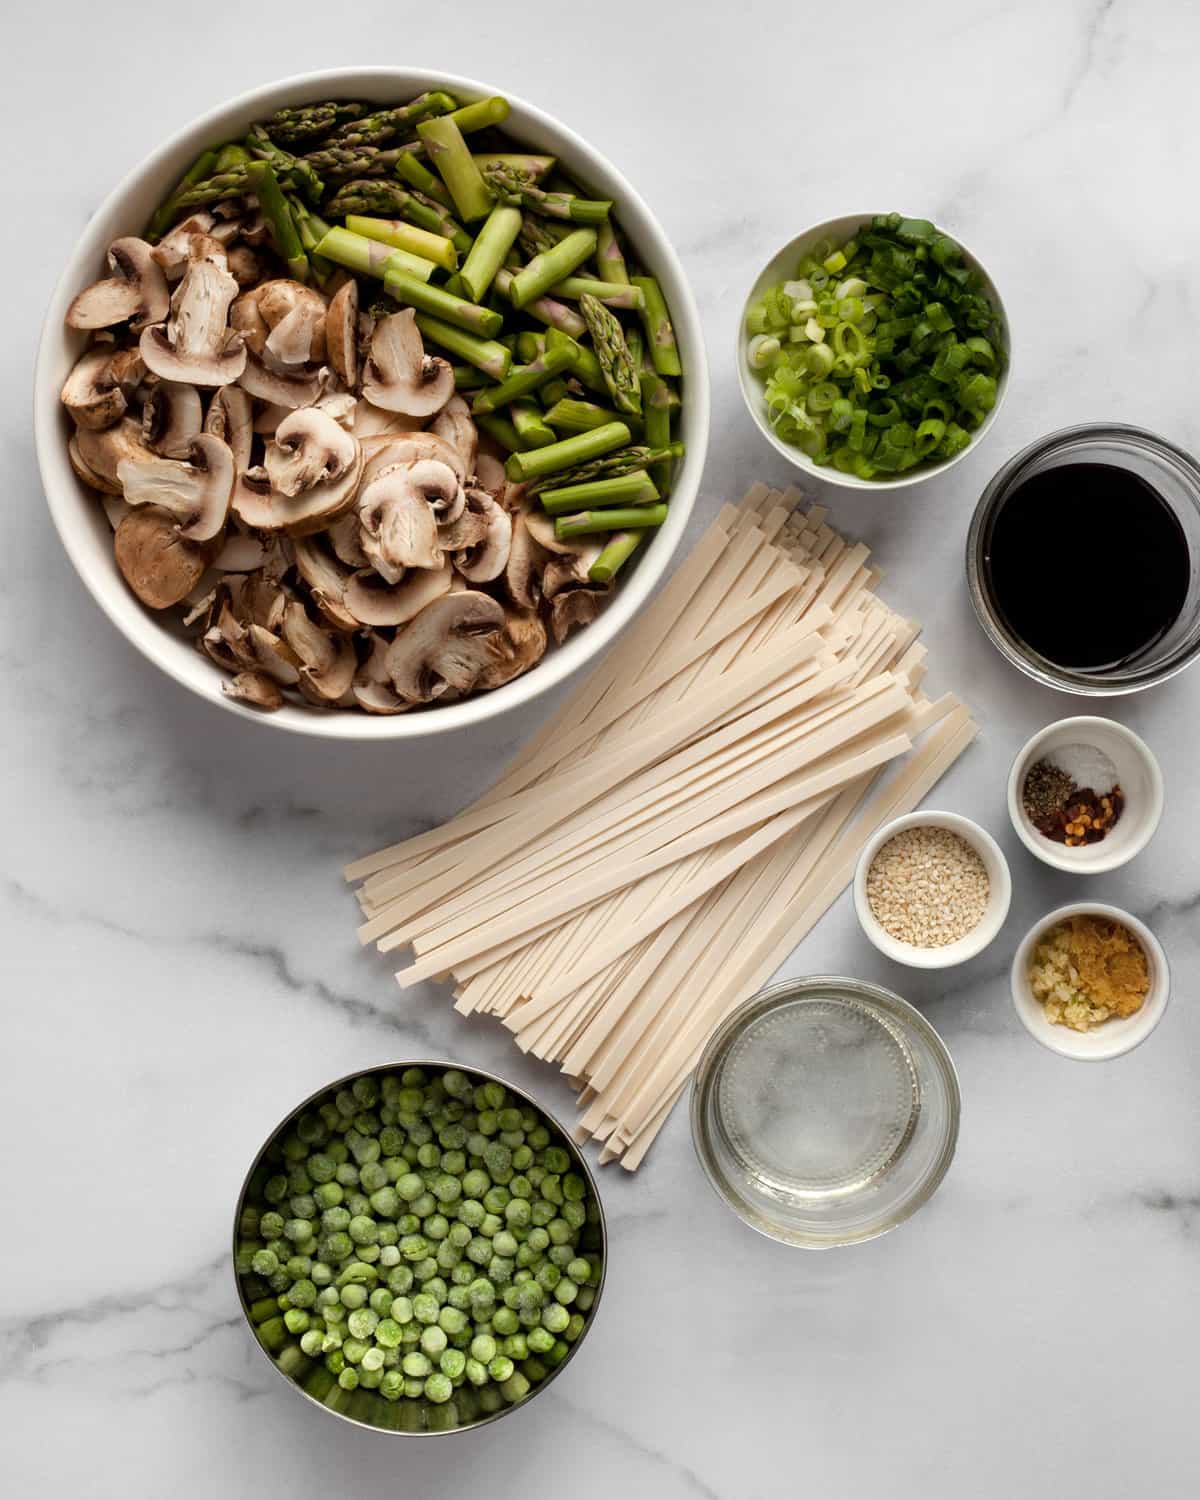 Ingredients including asparagus, mushrooms, peas, scallions, garlic, ginger, soy sauce and udon noodles.